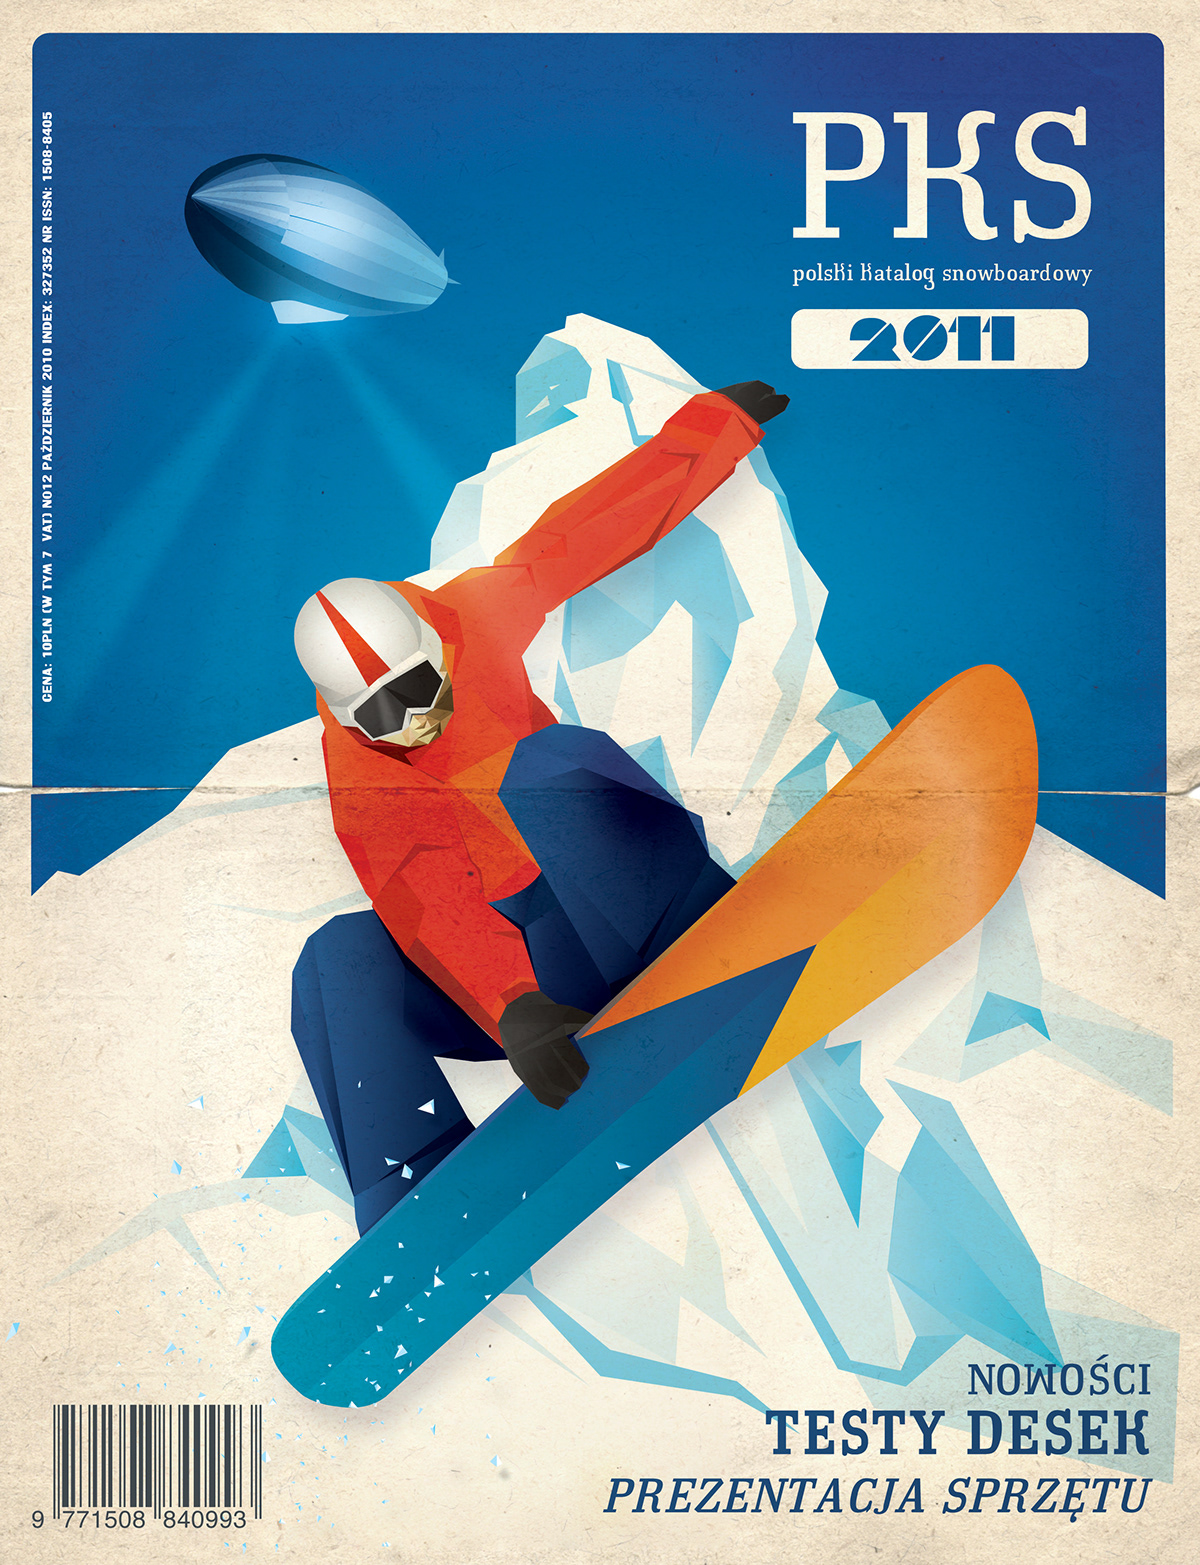 snowboard surfing lifestyle magazine cover